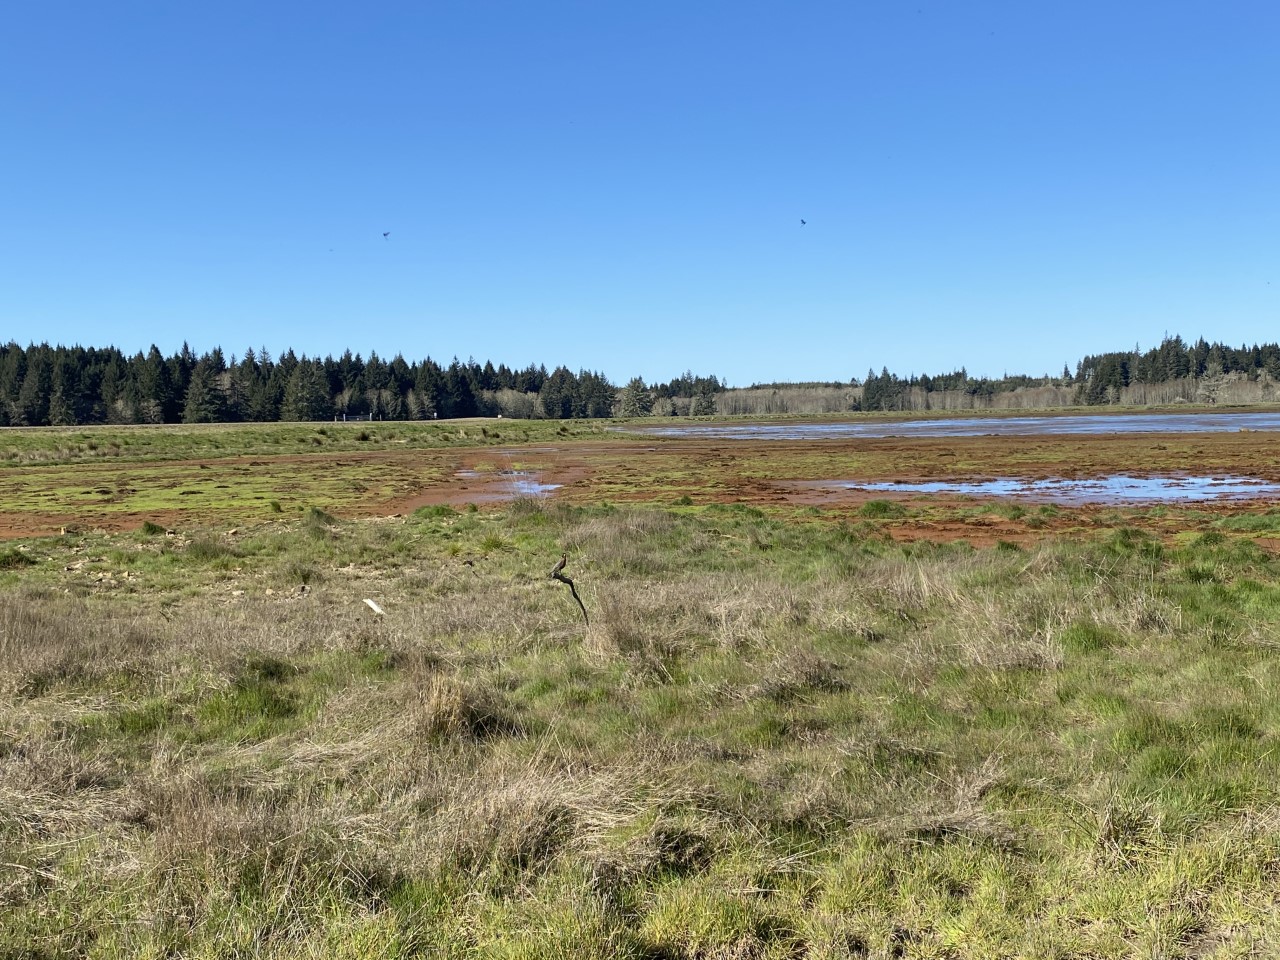 A green vegetated wetland with distant evergreen trees.